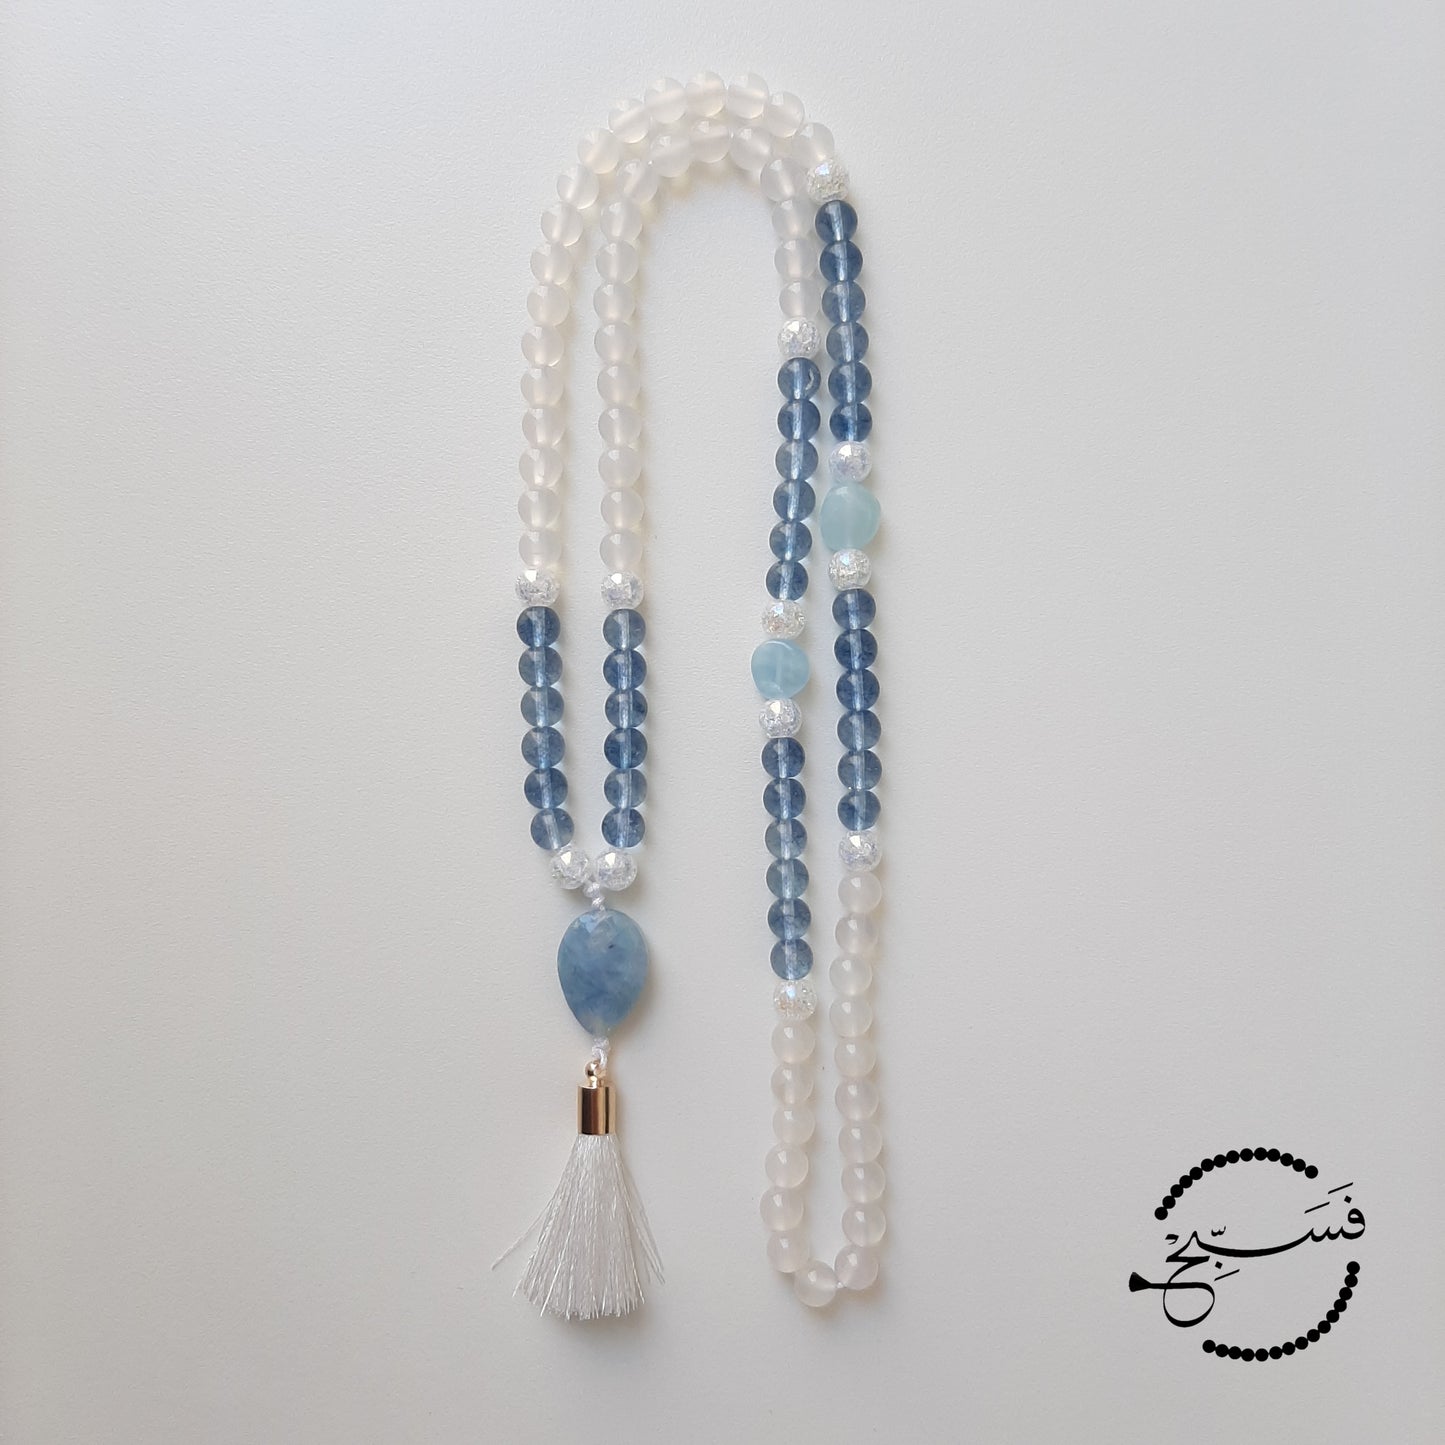 Aquamarine pendant and spacer beads, with white agate and blue topaz beads.  Packaged in a luxurious pouch and a gift box.  99 beads